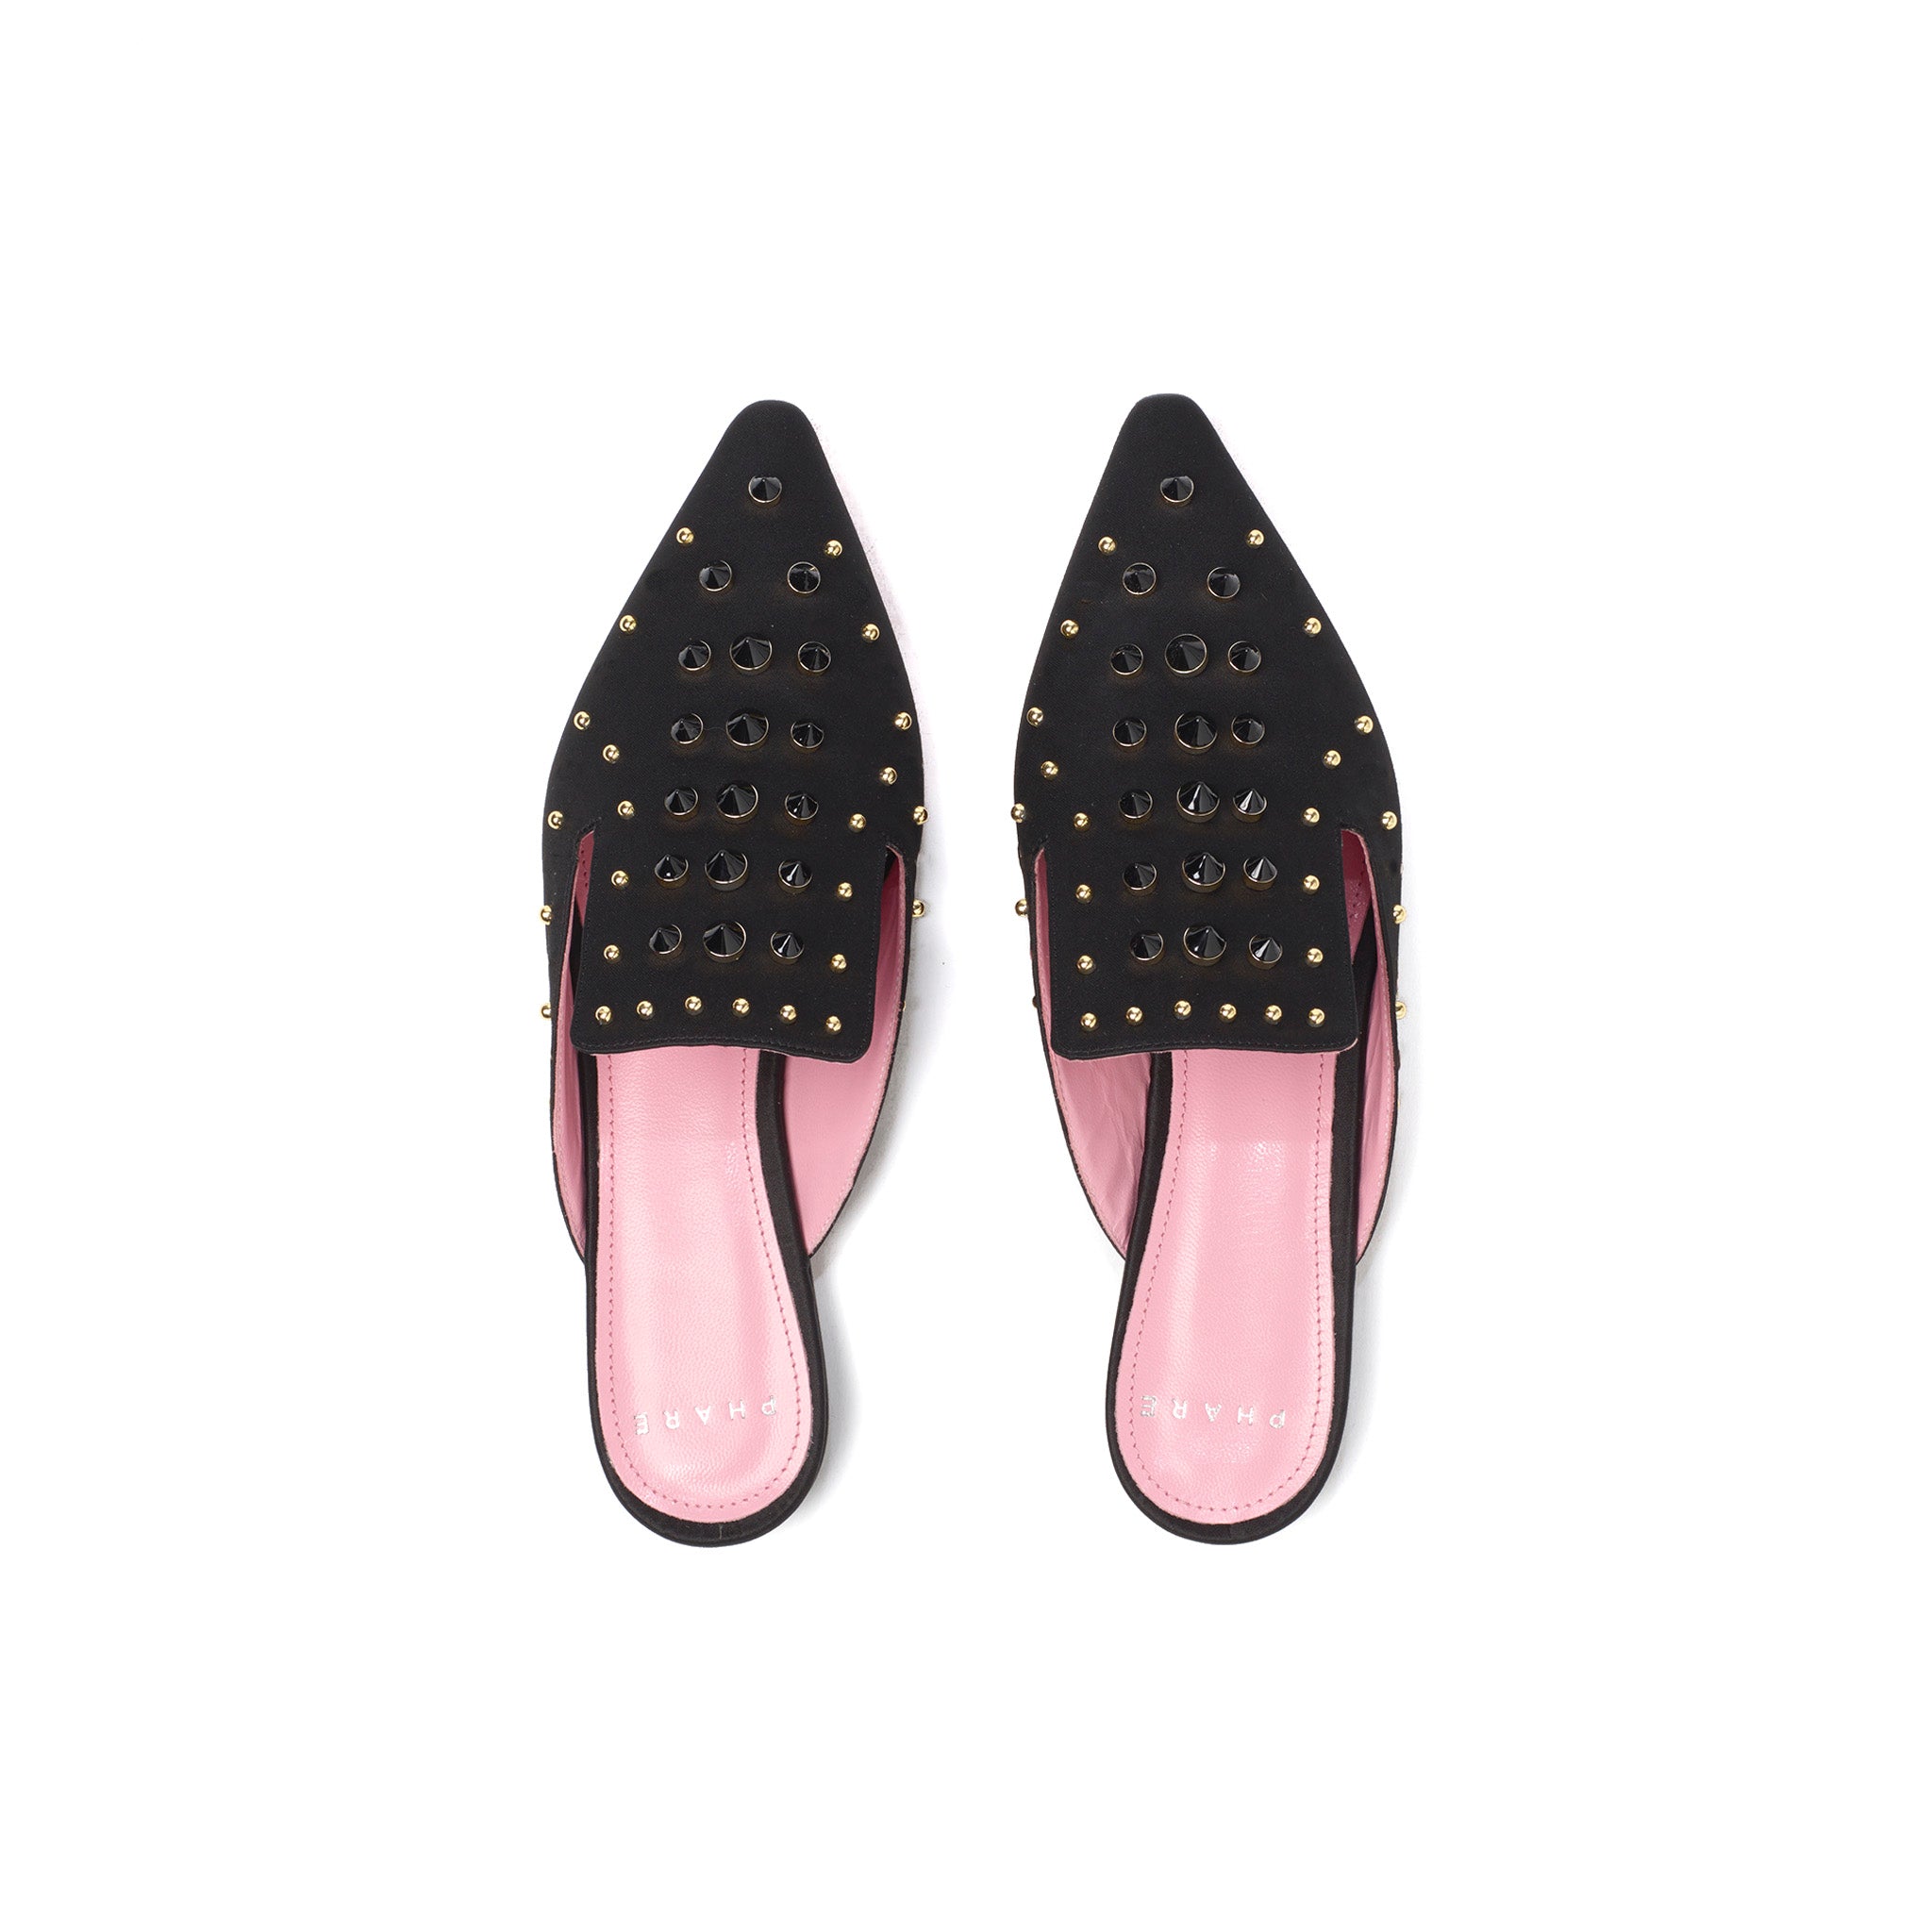 Phare Studded mule in black silk satin with gold and black studs top view 